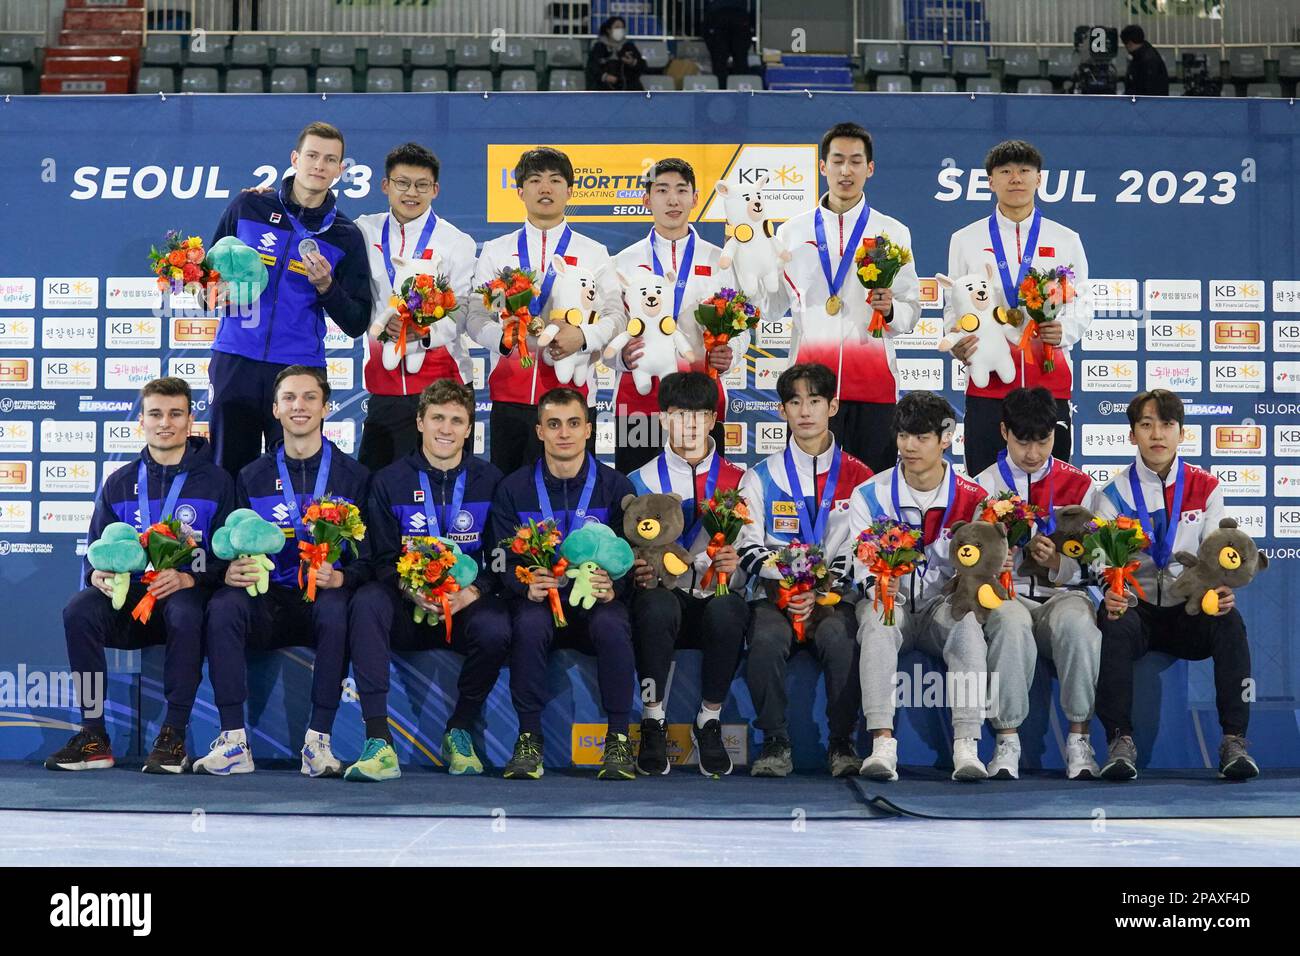 SEOUL, KOREA - MARCH 12: Andrea Cassinelli of Italy, Tommaso Dotti of Italy, Pietro Sighel of Italy and Luca Spechenhauser of Italy, Wenlong Li of China, Xiaojun Lin of China, Guanyi Liu of China and Yuchen Zhong of China, Kyung Hwan Hong of Korea, June Seo Lee of Korea, Yong Jin Lim of Korea and Ji Won Park of Korea during the podium ceremony after competing on the Men's Relay during the ISU World Short Track Speed Skating Championships at Mokdong Ice Rink on March 12, 2023 in Seoul, Korea (Photo by Andre Weening/Orange Pictures) Stock Photo